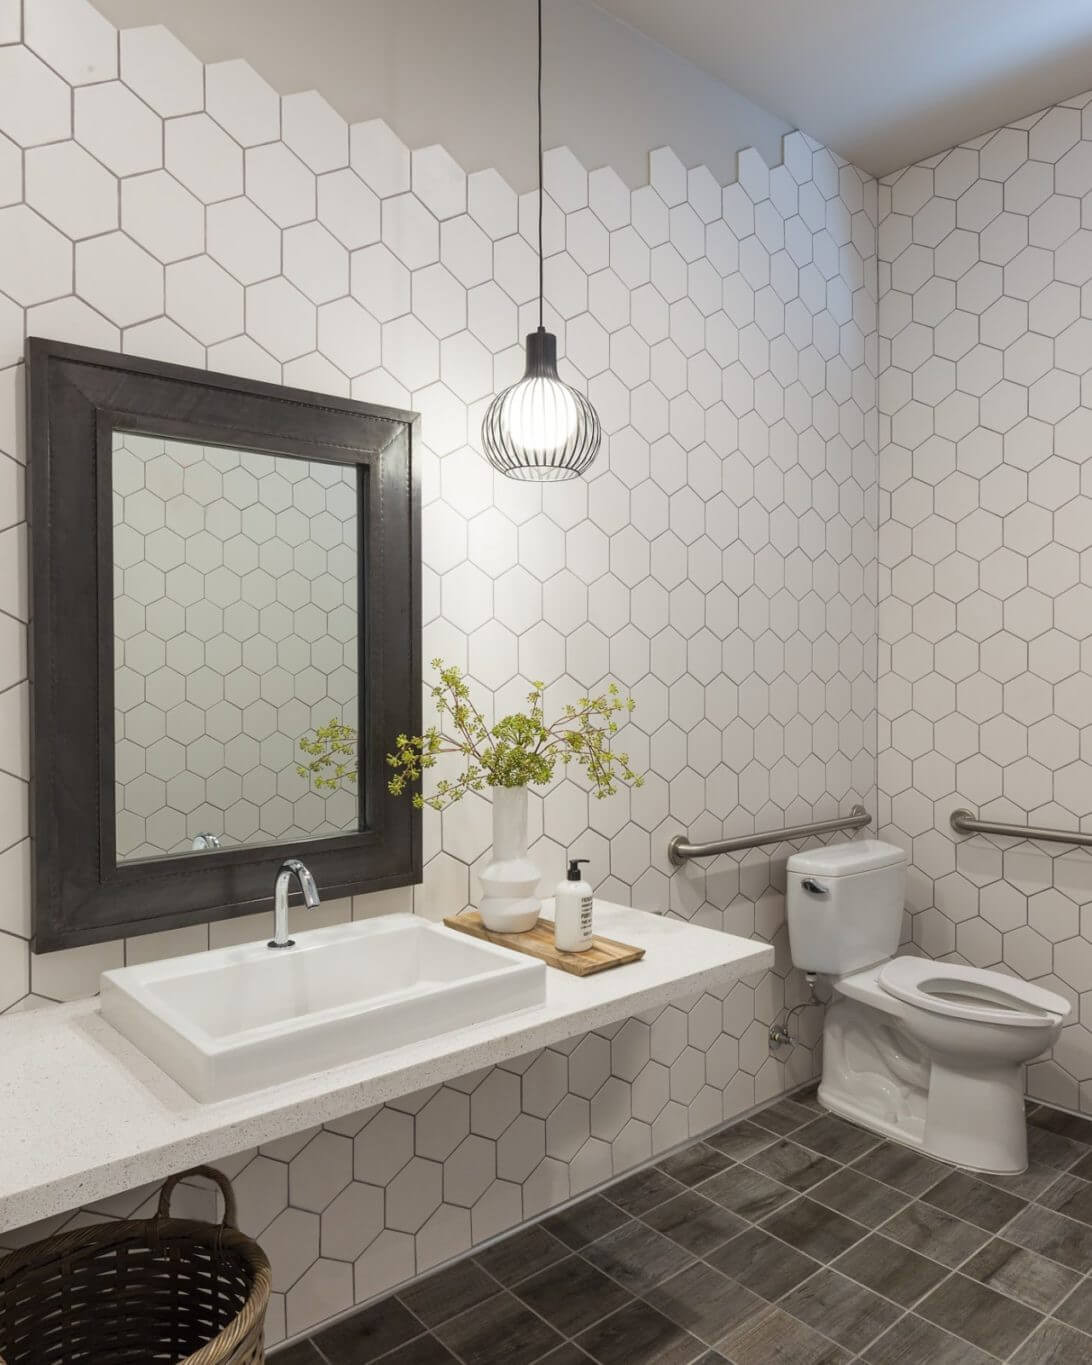 Tile A Bathroom Wall
 Your plete Guide to Bathroom Tile